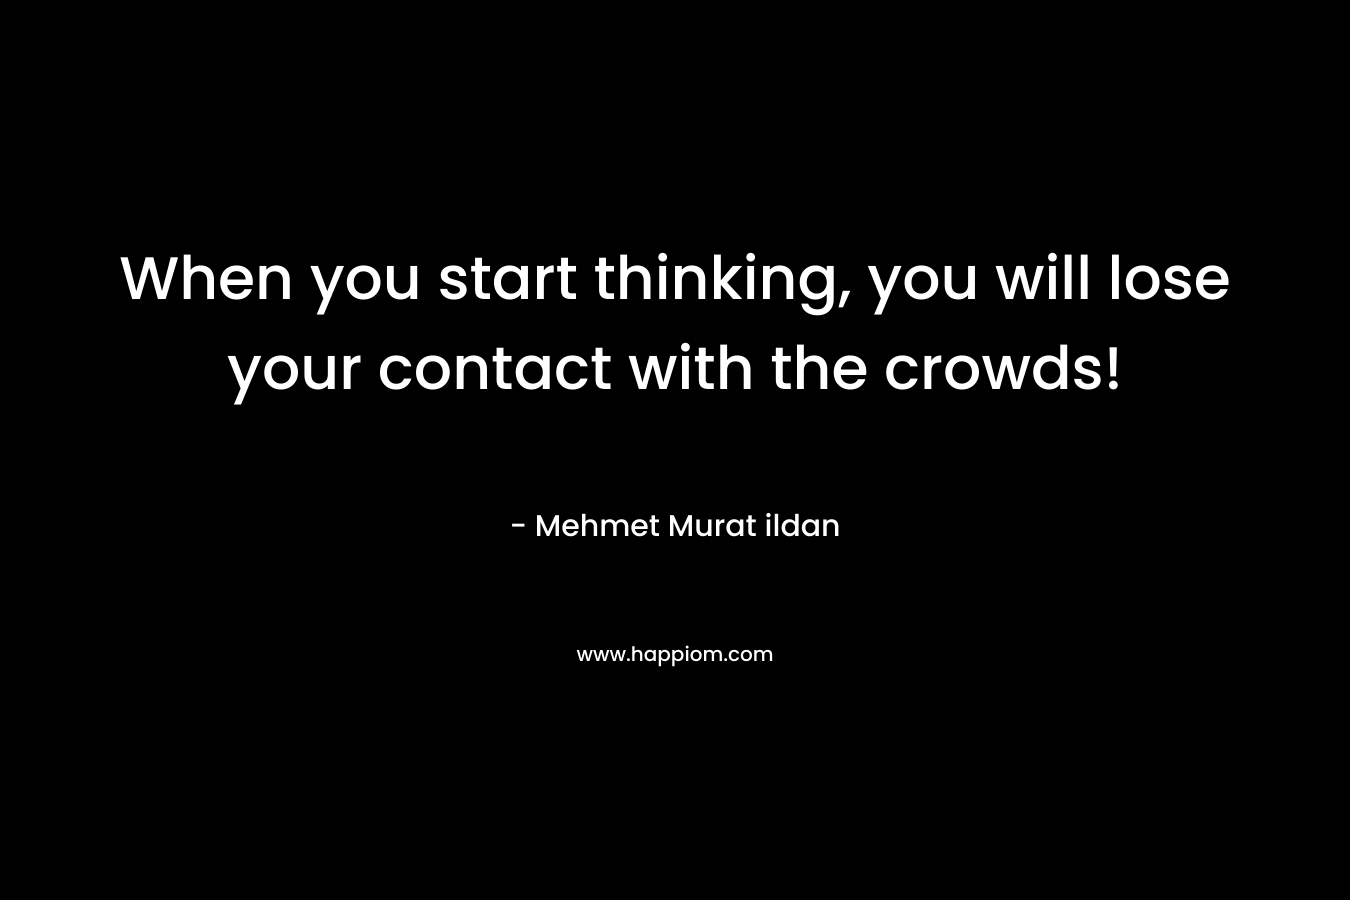 When you start thinking, you will lose your contact with the crowds!